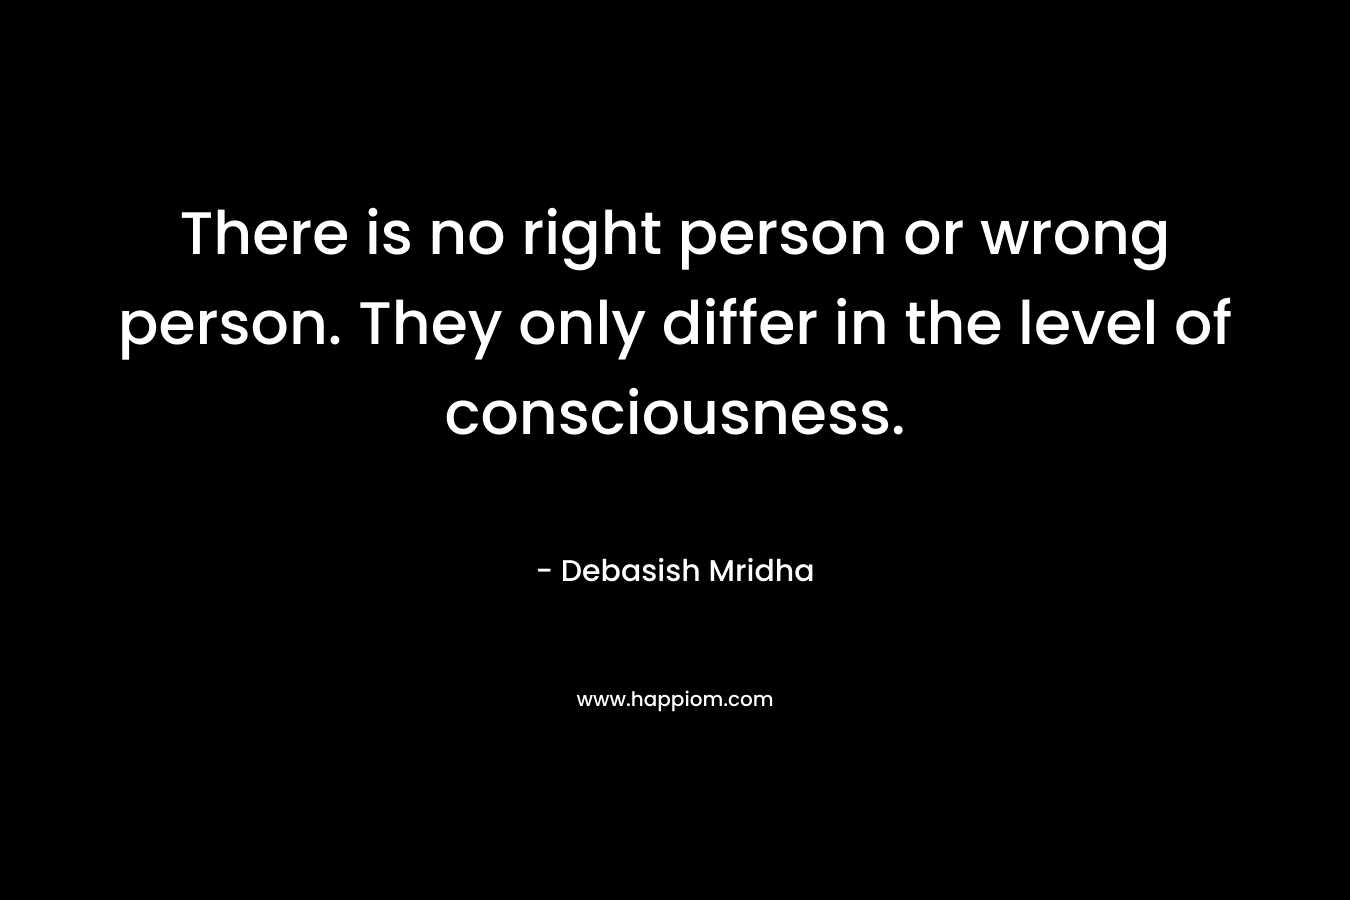 There is no right person or wrong person. They only differ in the level of consciousness.